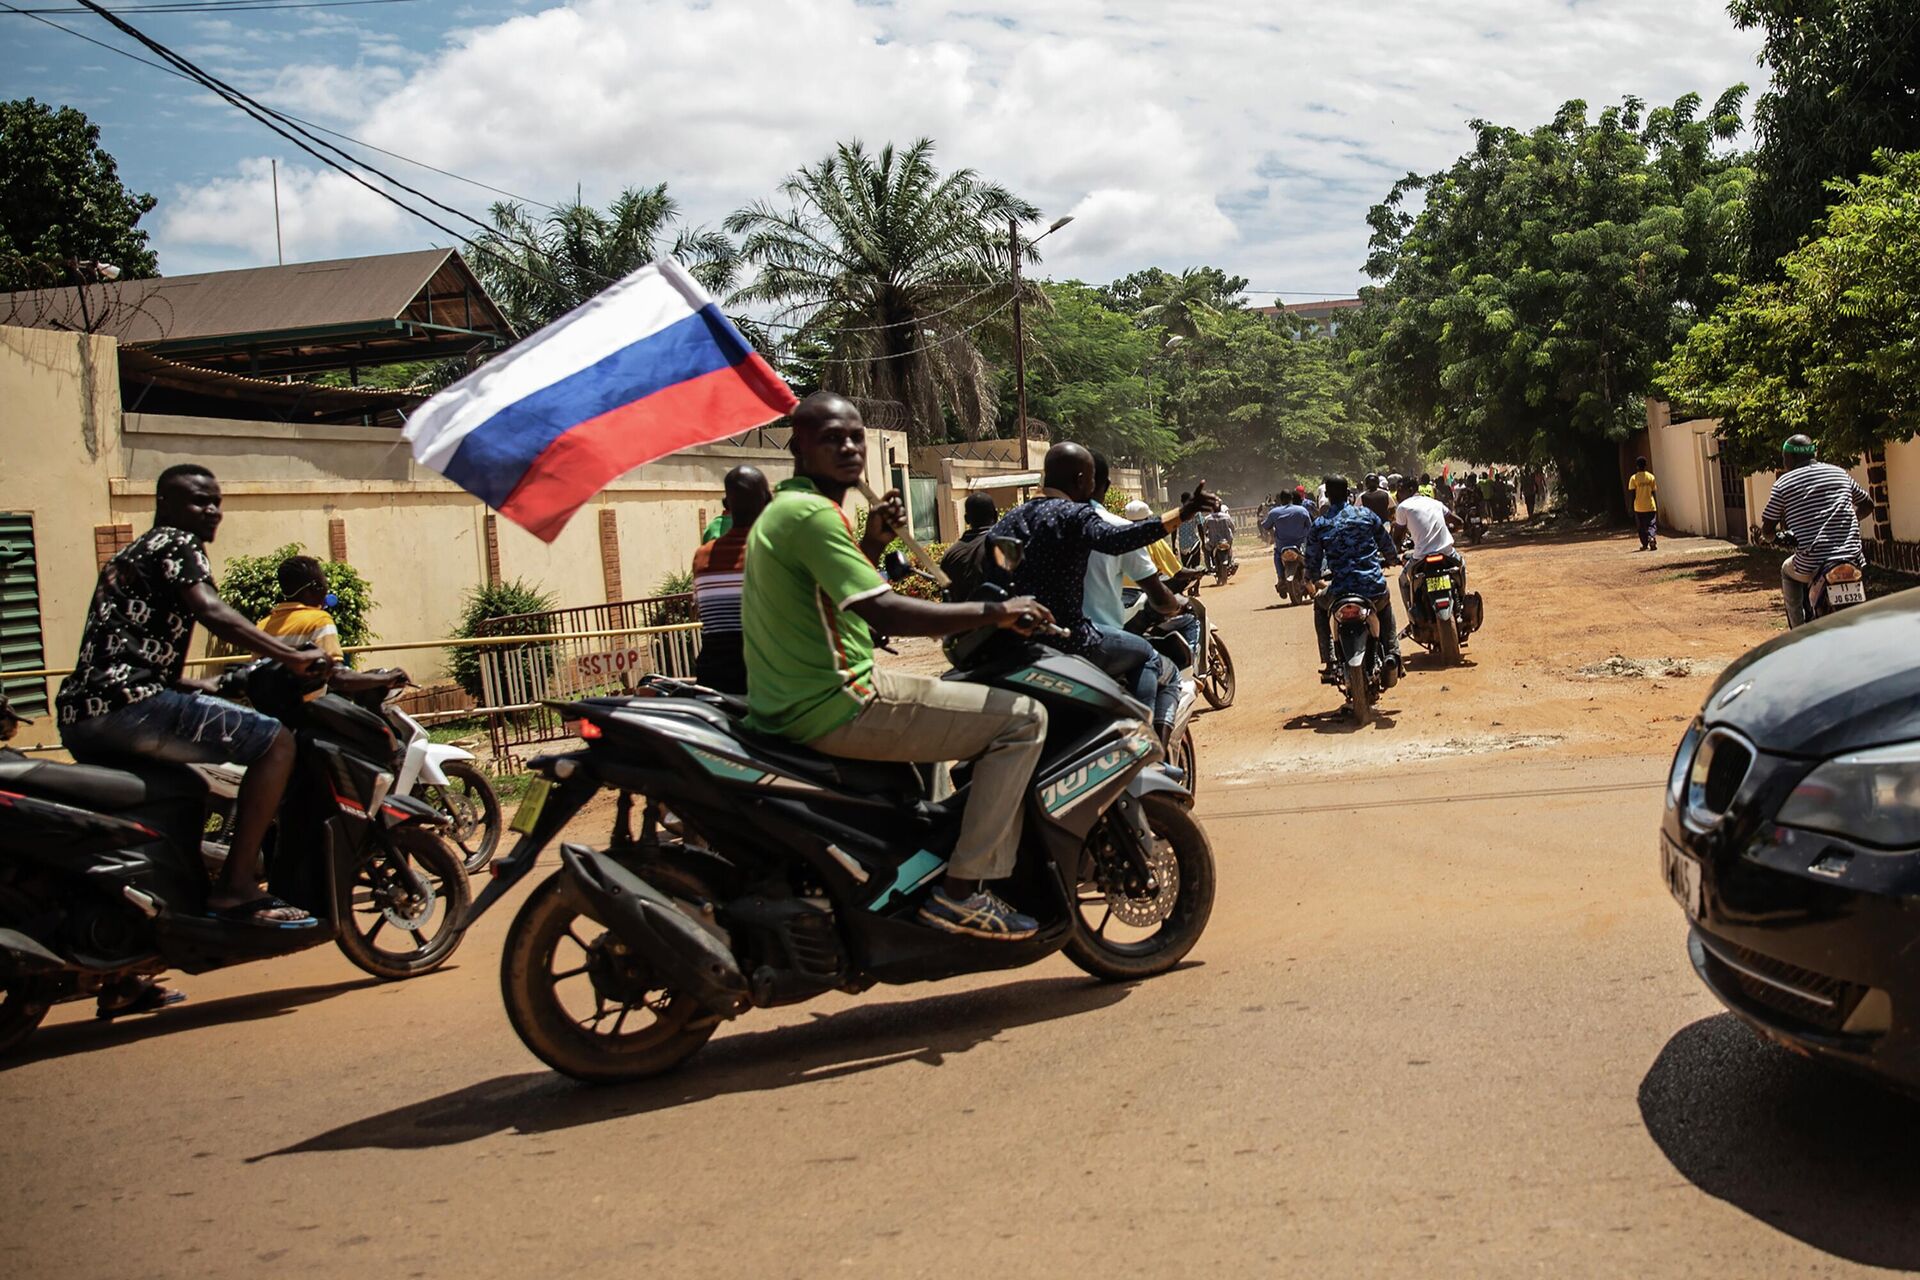 Supporters of Capt. Ibrahim Traore parade waving a Russian flag in the streets of Ouagadougou, Burkina Faso, Sunday, Oct. 2, 2022. Burkina Faso's new junta leadership is calling for calm after the French Embassy and other buildings were attacked. The unrest following the West African nation's second coup this year came after a junta statement alleged that the ousted interim president was at a French military base in Ouagadougou. France vehemently denied the claim and has urged its citizens to stay indoors amid rising anti-French sentiment in the streets. (AP Photo/Sophie Garcia) - Sputnik International, 1920, 15.10.2022